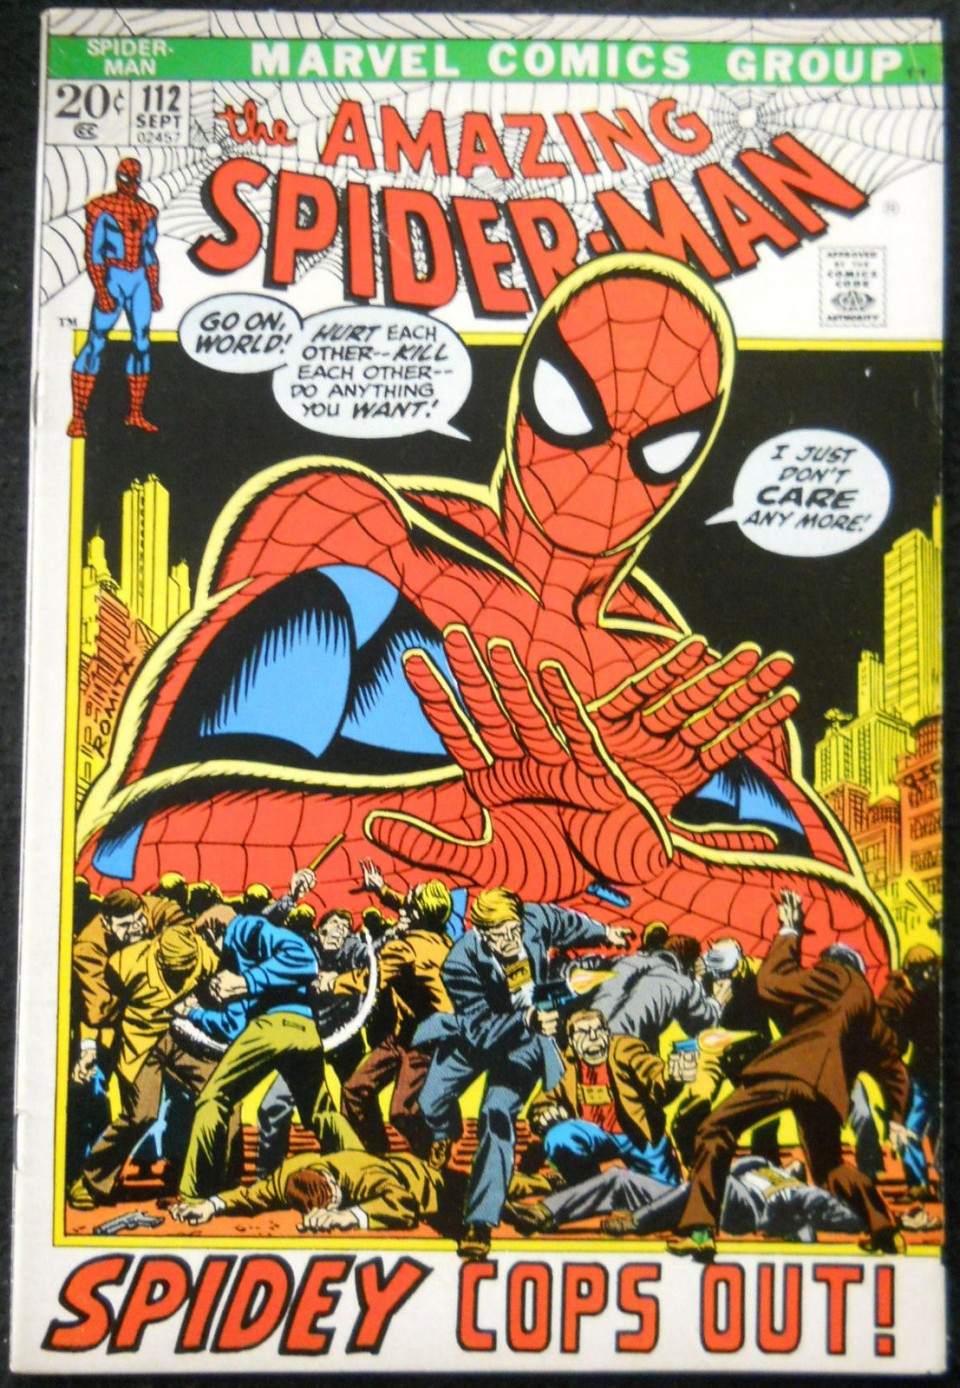 AMAZING SPIDER-MAN #112 FN+ SPIDEY COPS OUT - Silver Age Comics